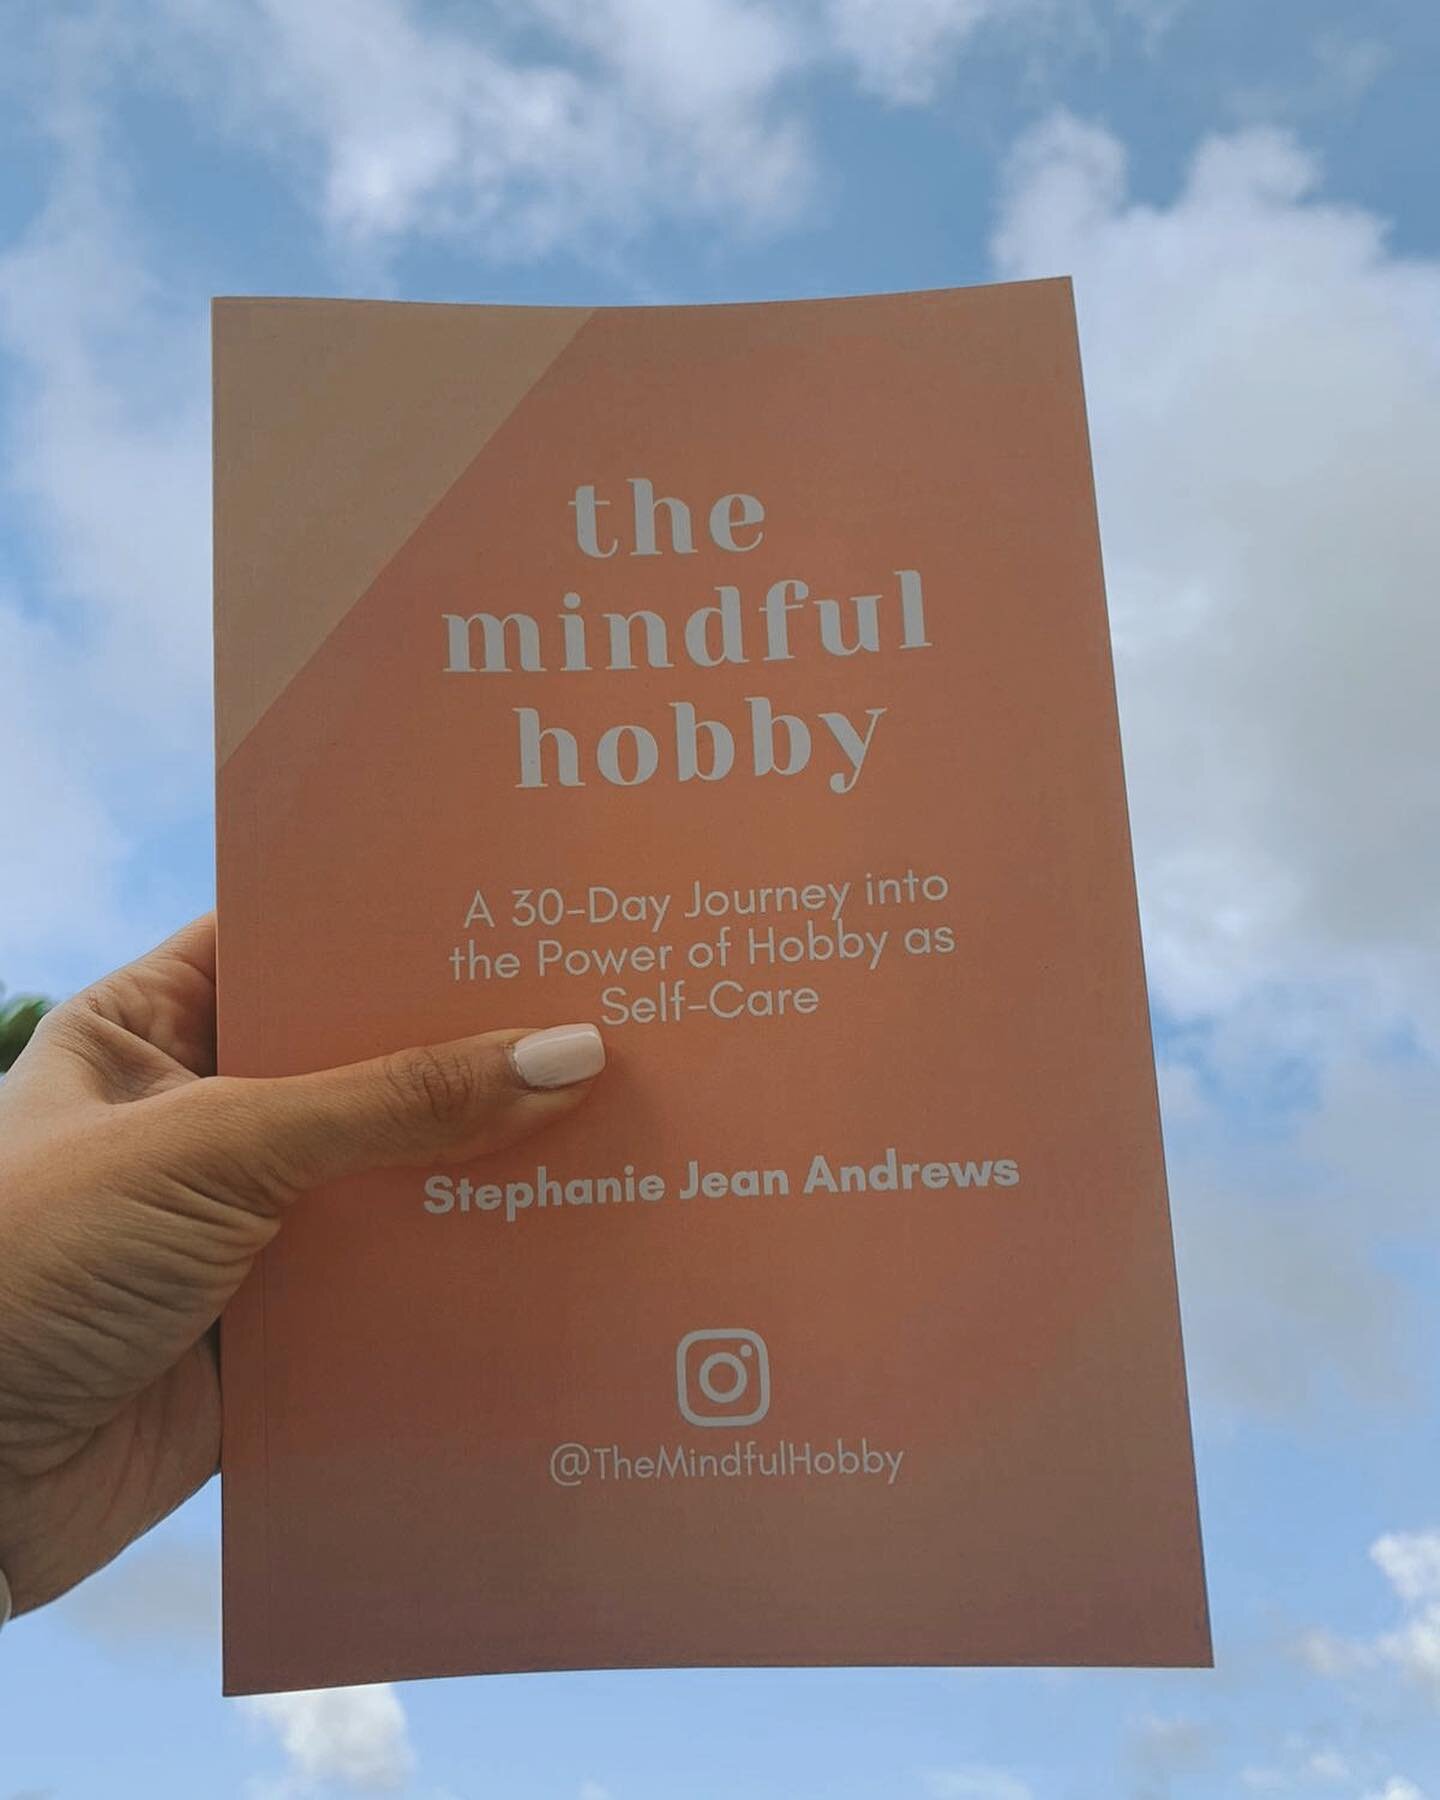 🎉 GIVEAWAY 🎉
⠀⠀⠀⠀⠀⠀⠀⠀⠀
Happy Saturday everyoneeee! To those who have heard Episode 25 with author and hobby enthusiast Stephanie Jean Andrews, you know the story behind this lovely book and workbook &quot;The Mindful Hobby&quot;. If you haven't hea